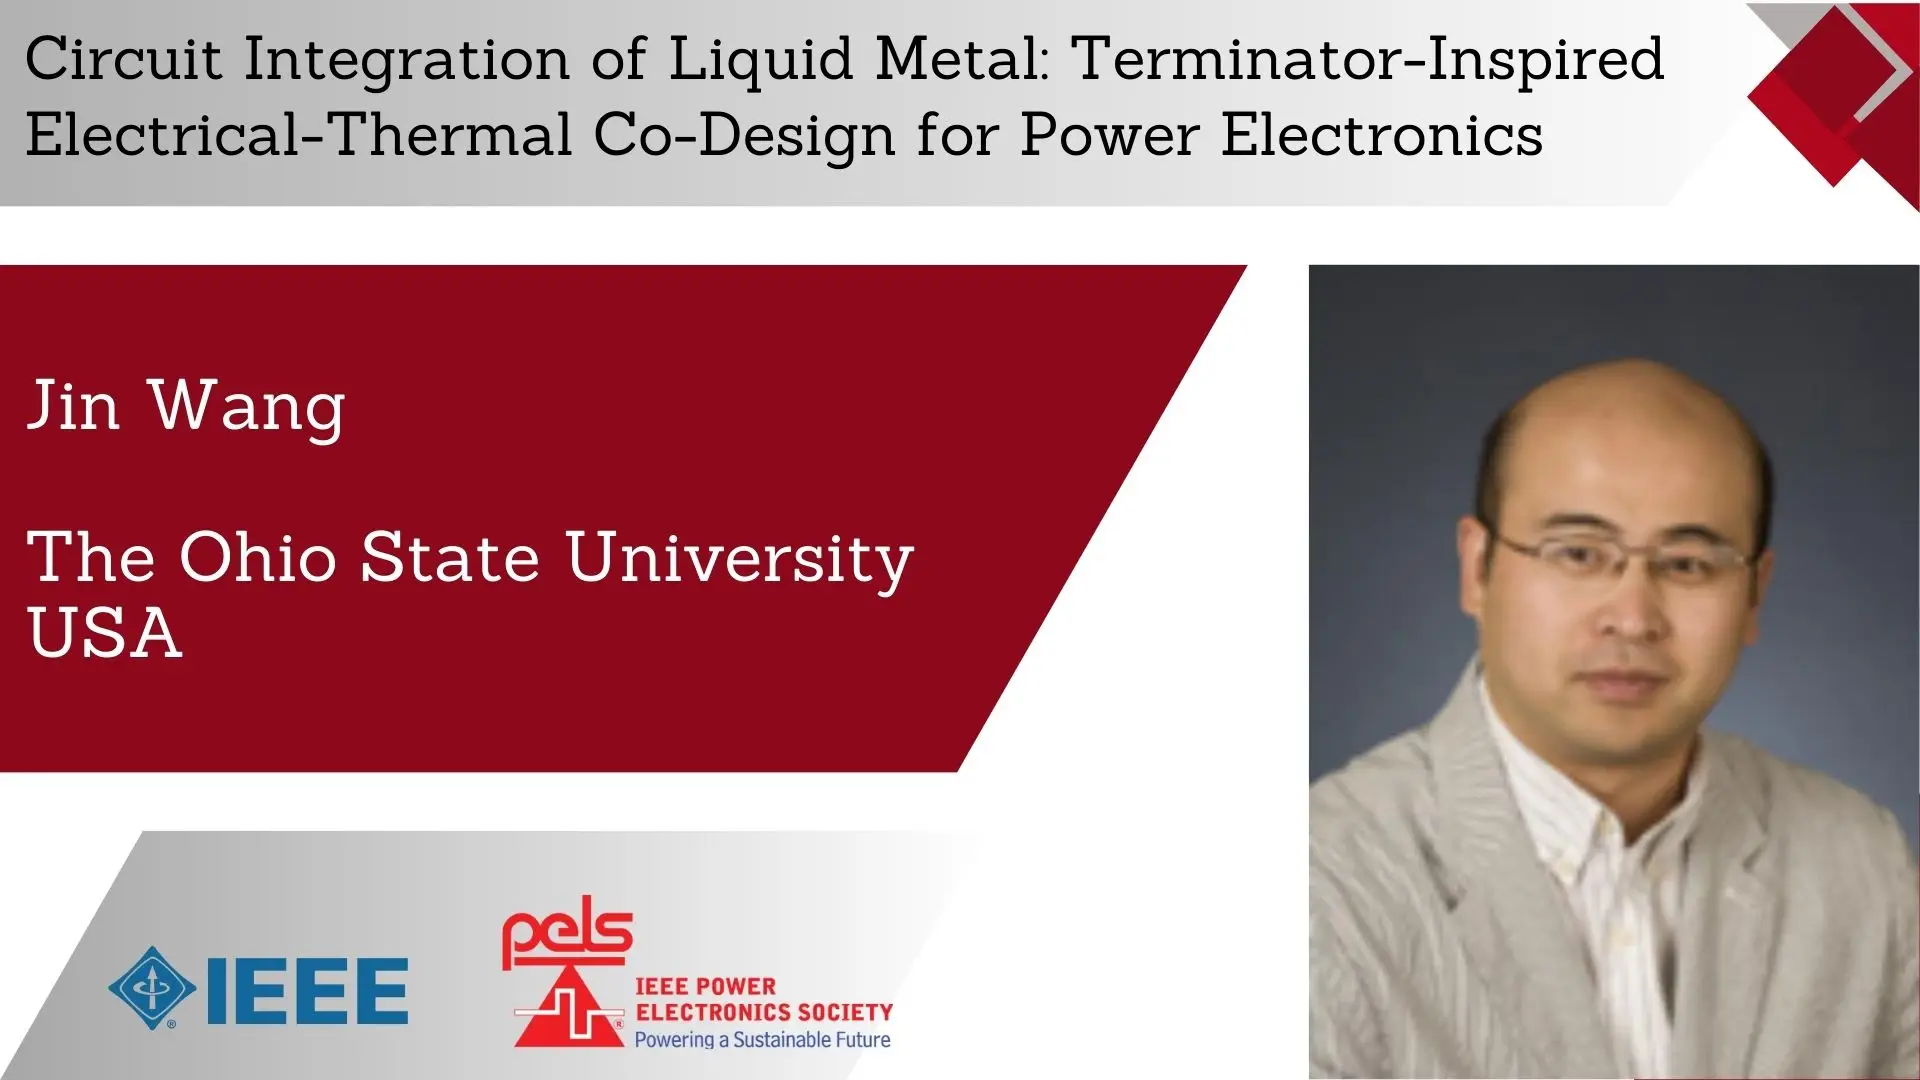 Circuit Integration of Liquid Metal: Terminator-Inspired Electrical-Thermal Co-Design for Power Electronics-Video